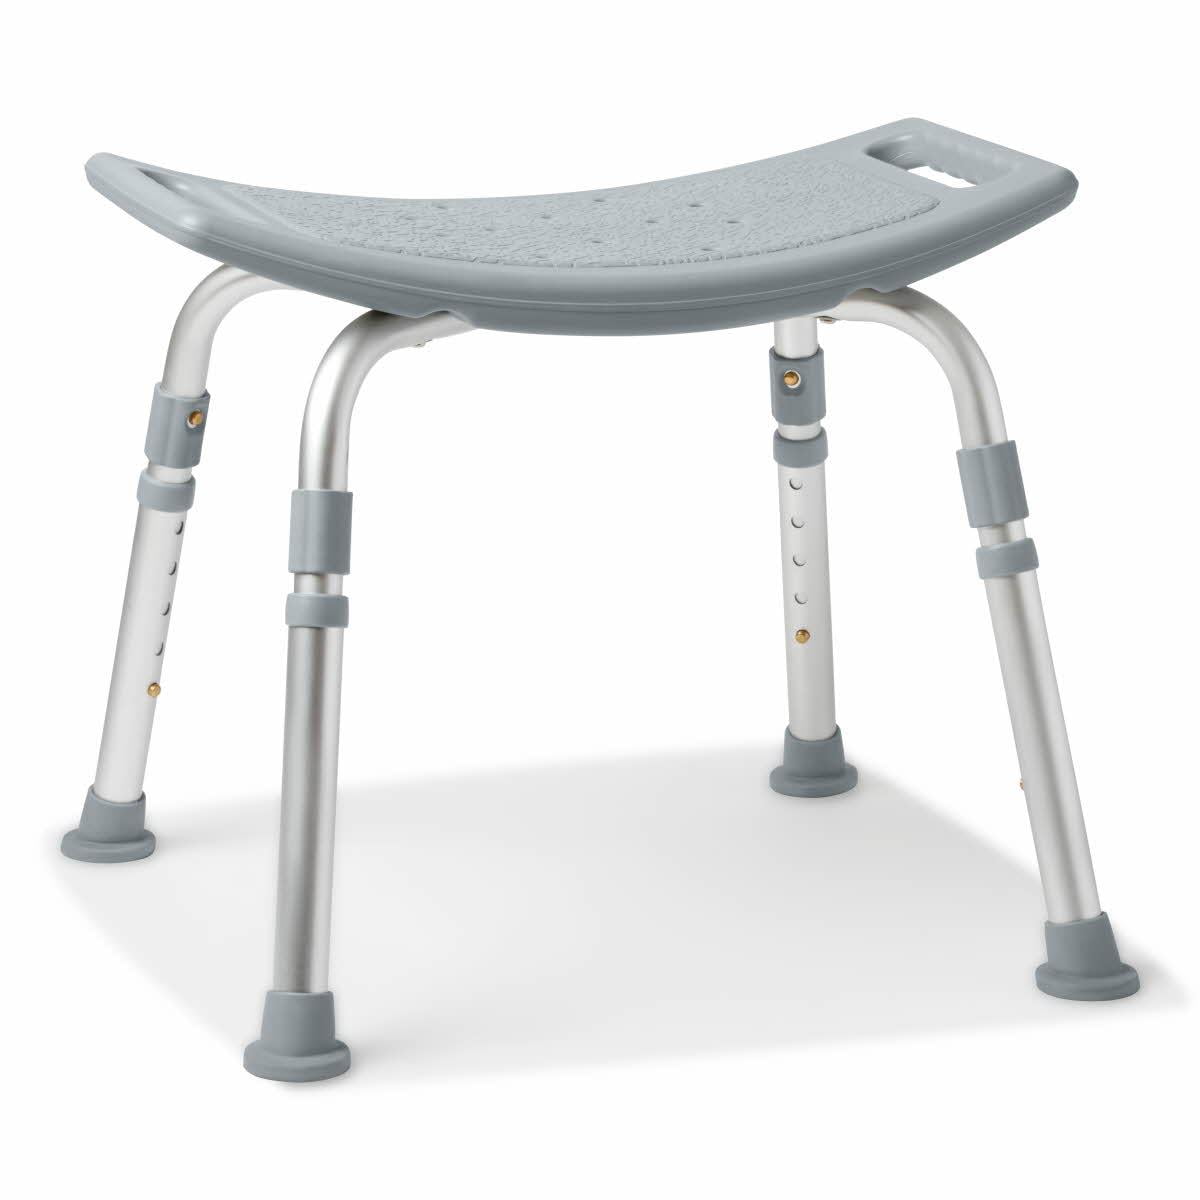 Platinum Health Hip Chair, APEX(tm) Premium, Padded, Height Adjustable,  SEAT-Angle Adjustable Hip Chair. Doctor and Rehab Specialist Recommended